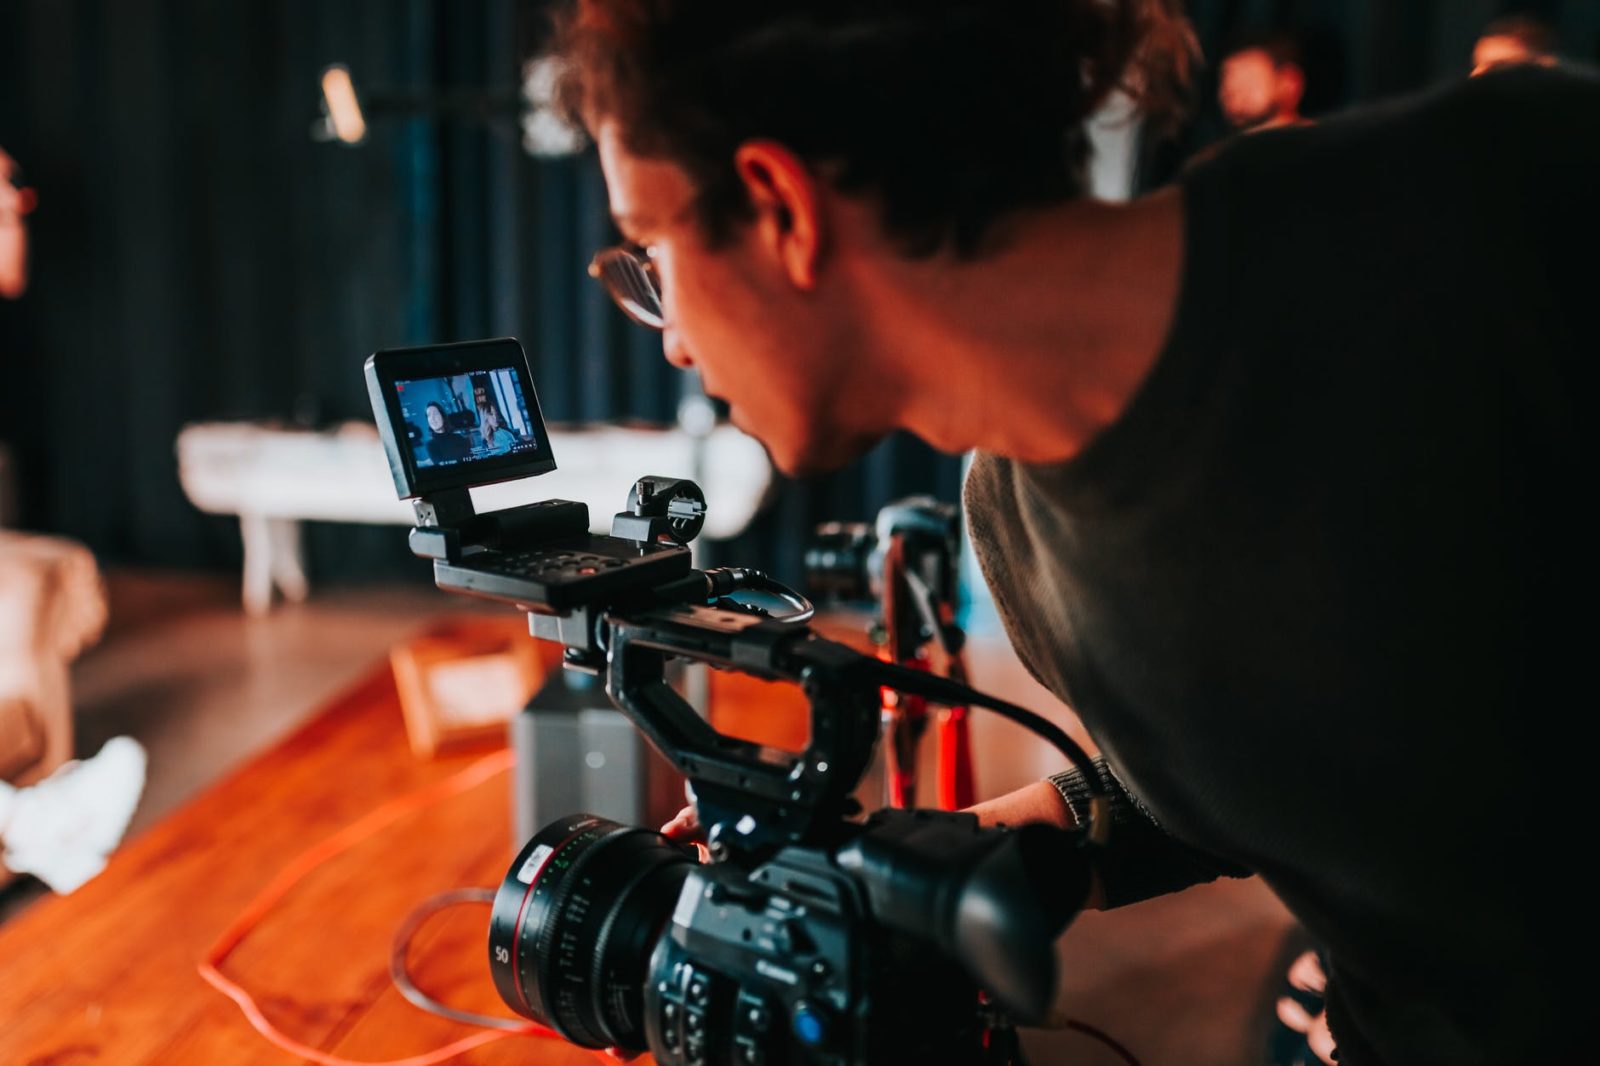 How can videos boost your business?